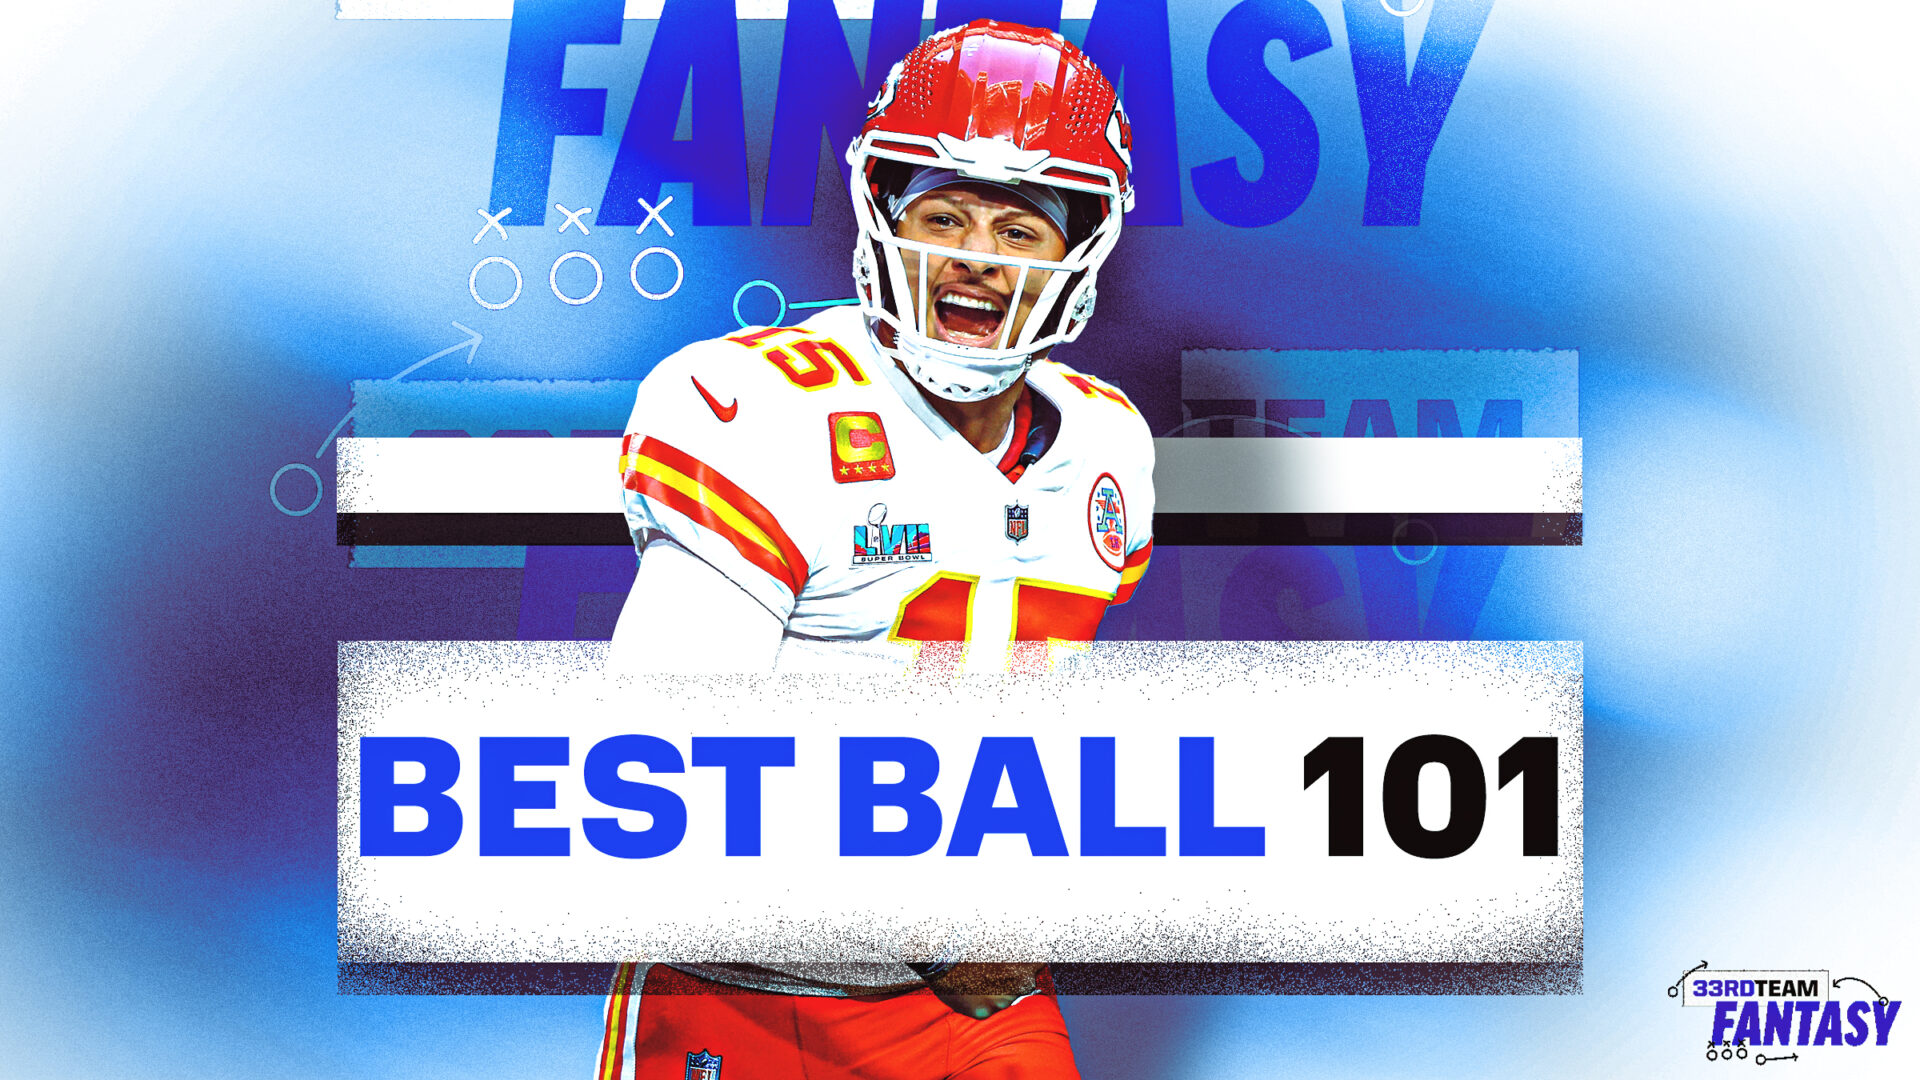 Best Ball 101: Lineup Advice, Draft Strategy, Where to Play